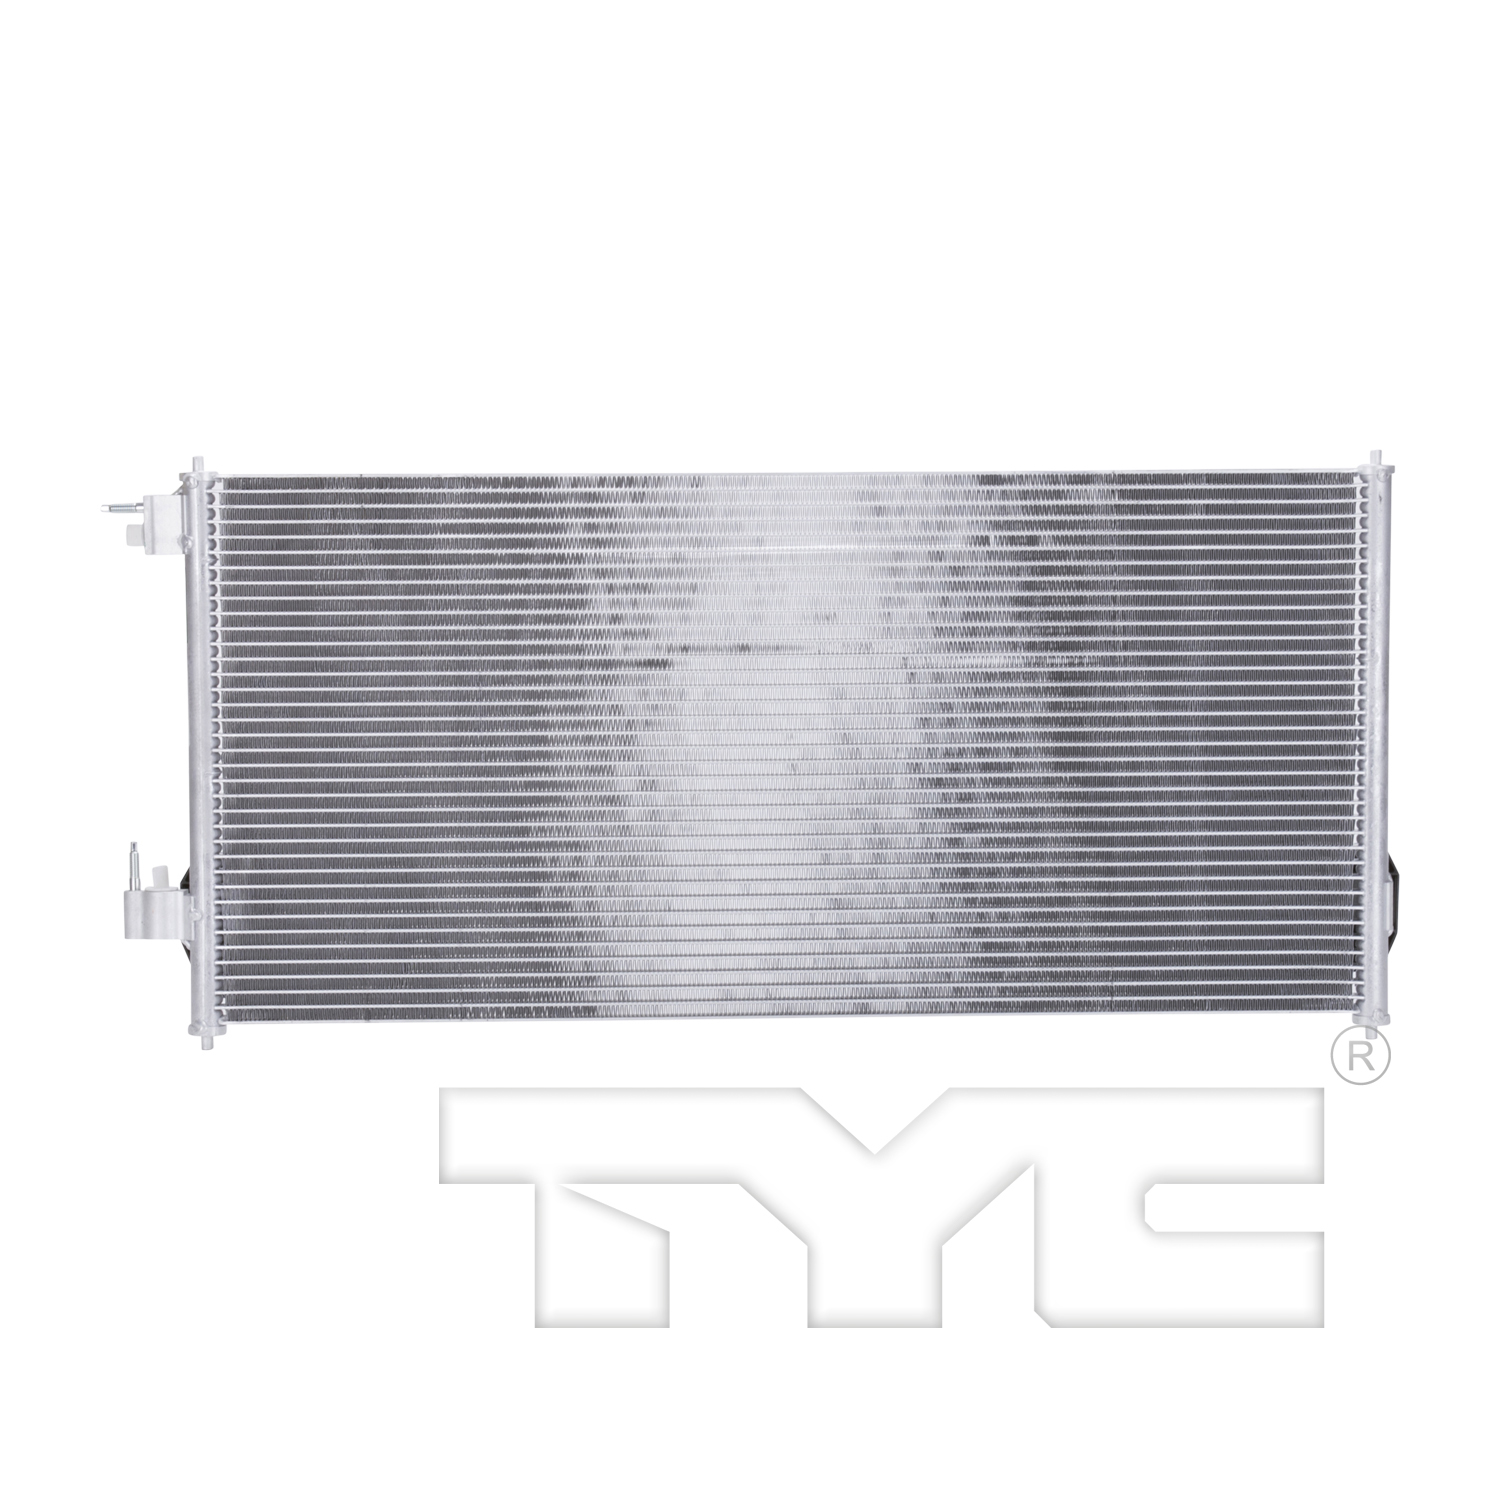 Aftermarket AC CONDENSERS for FORD - TRANSIT CONNECT, TRANSIT CONNECT,10-13,Air conditioning condenser